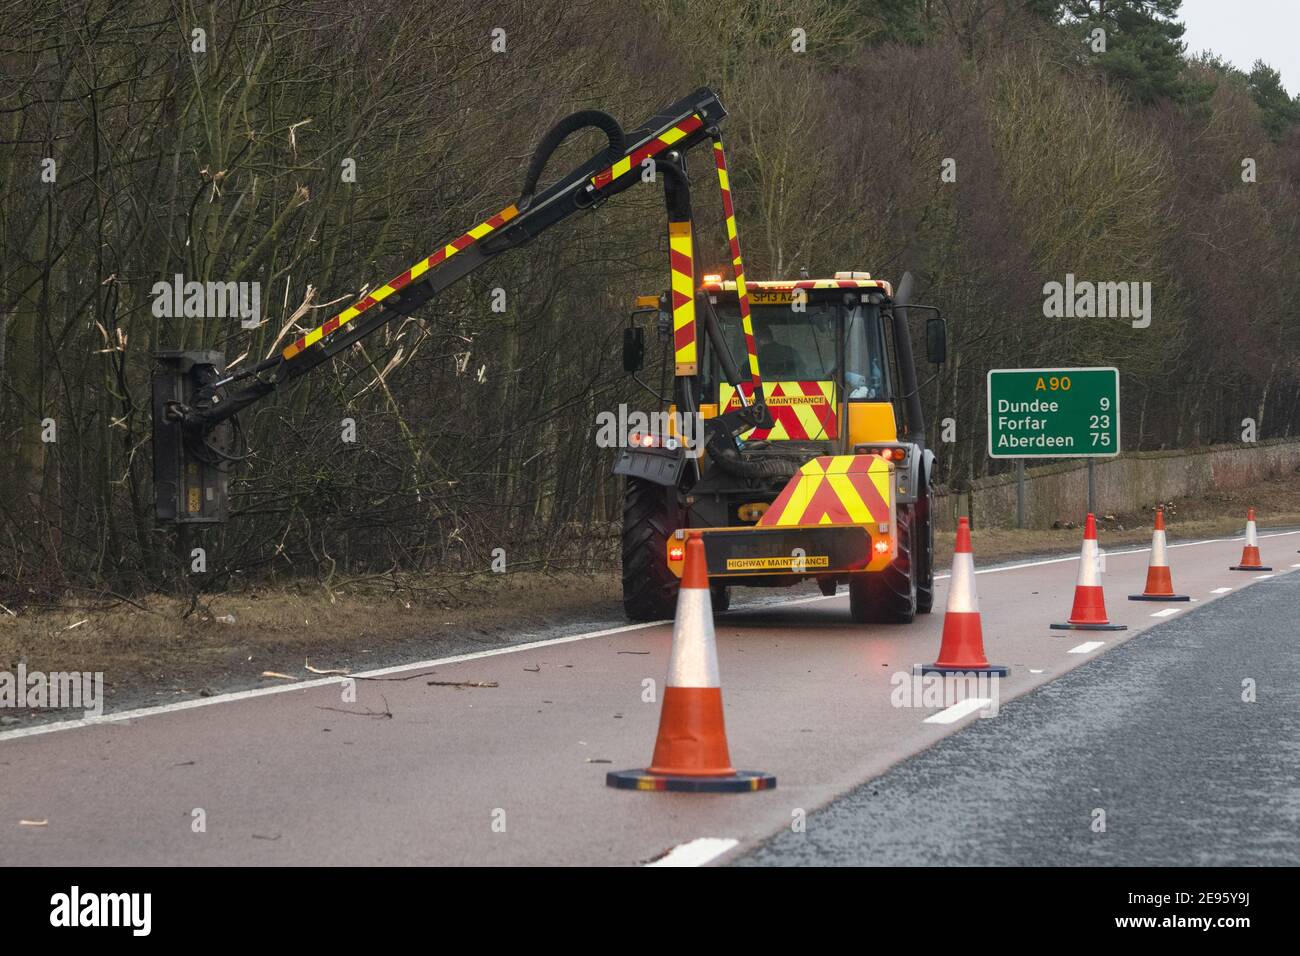 Tree trimming using a flail hedge cutter attached to tractor along the side of the A90 trunk road, Scotland, UK Stock Photo